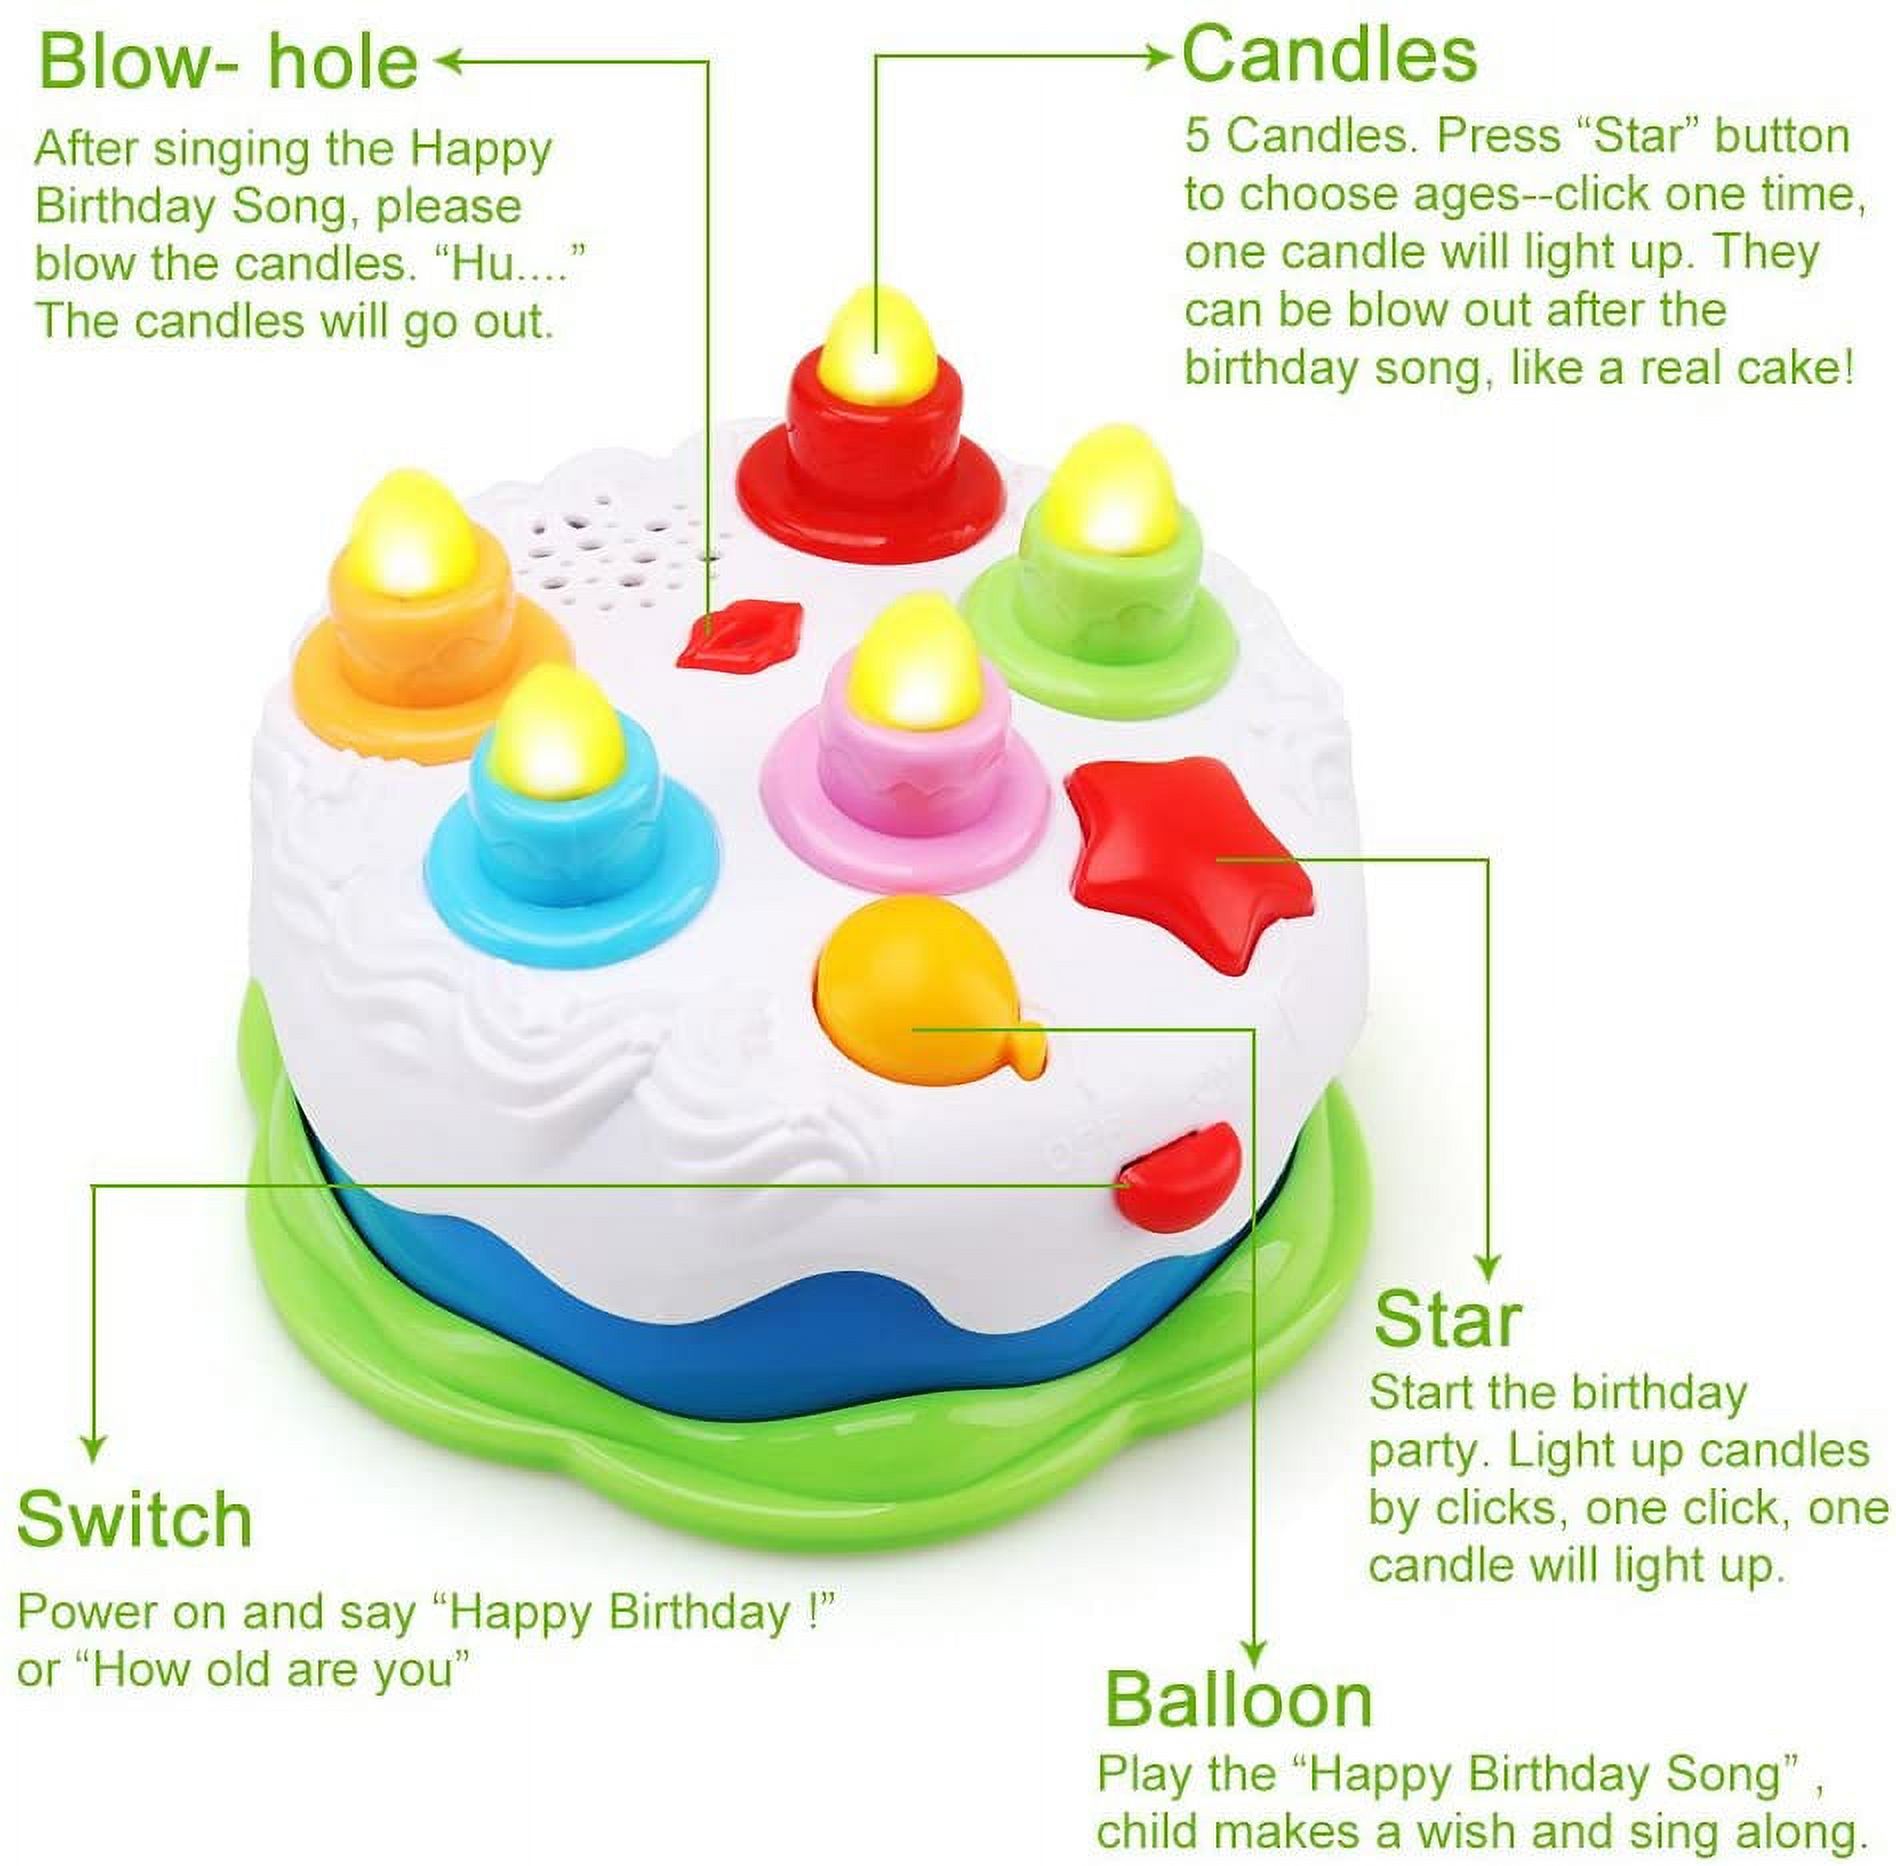 Kids Birthday Cake Toy for Baby & Toddlers with Counting Candles & Music, Gift Toys for 1 2 3 4 5 Years Old Boys and Girls - image 2 of 9